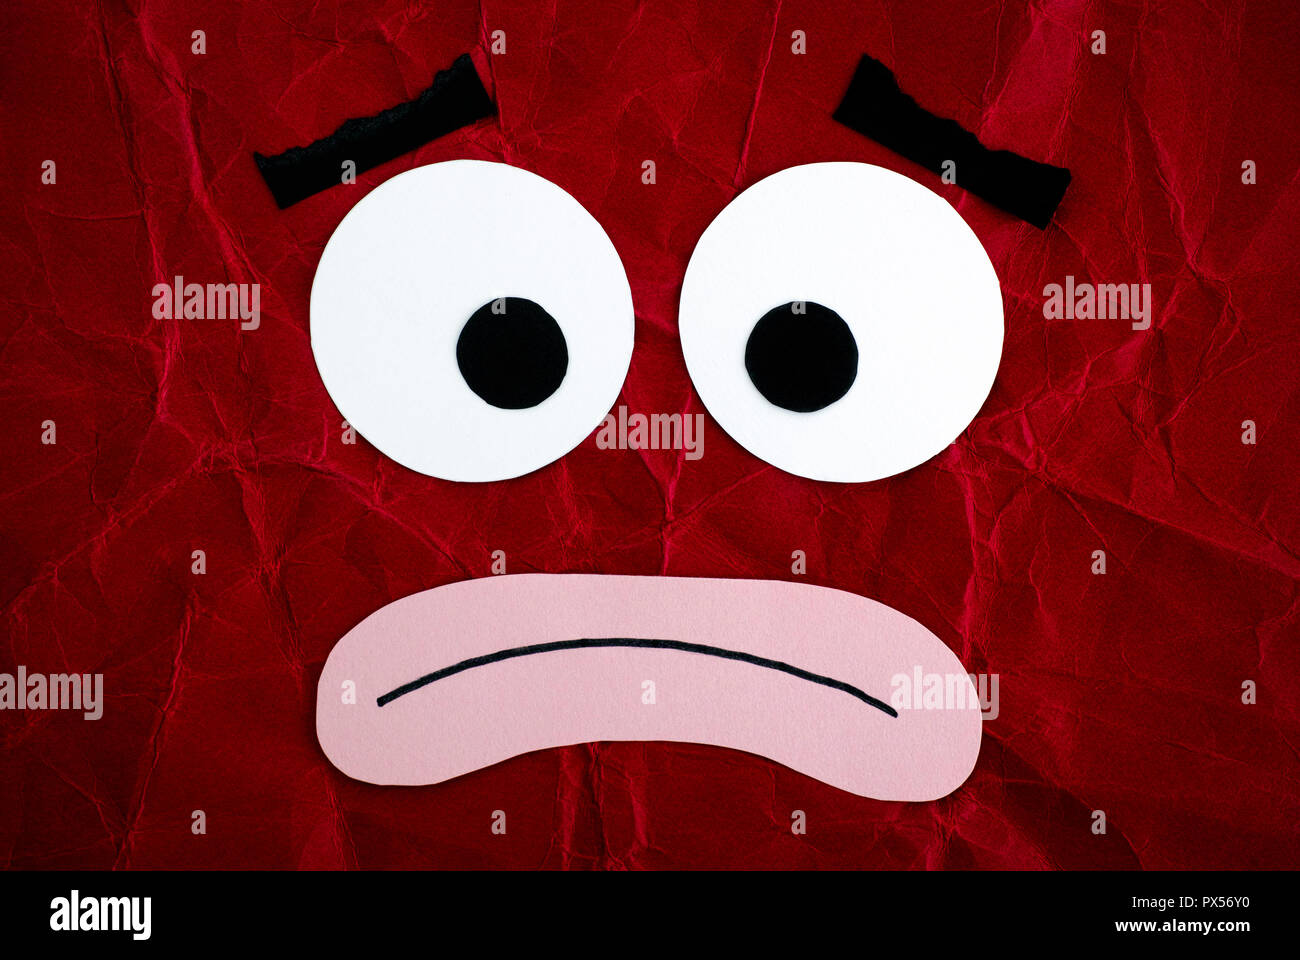 Sad character. Emotional face made from paper. Red background. Stock Photo